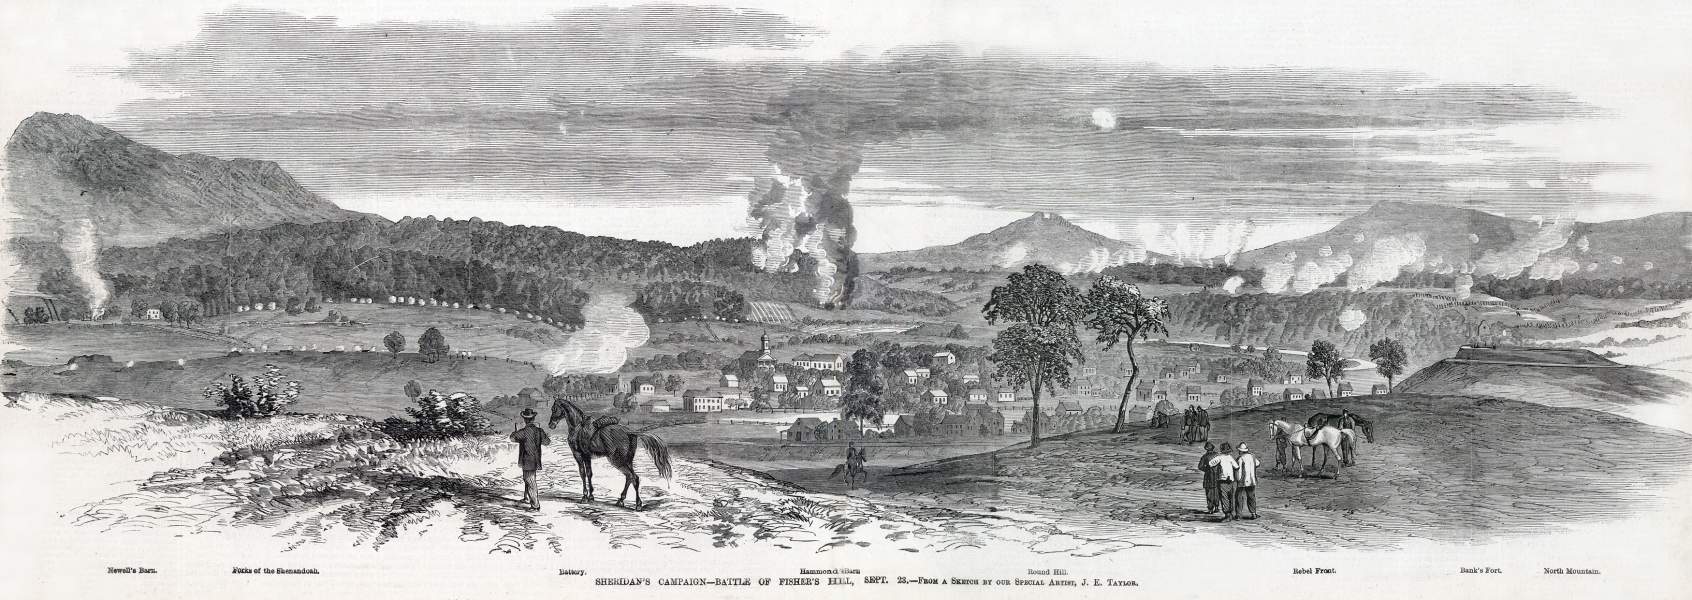 Strasburg, Virginia, during the Battle of Fisher's Hill, September 21-22, 1864, artist's impression, zoomable image